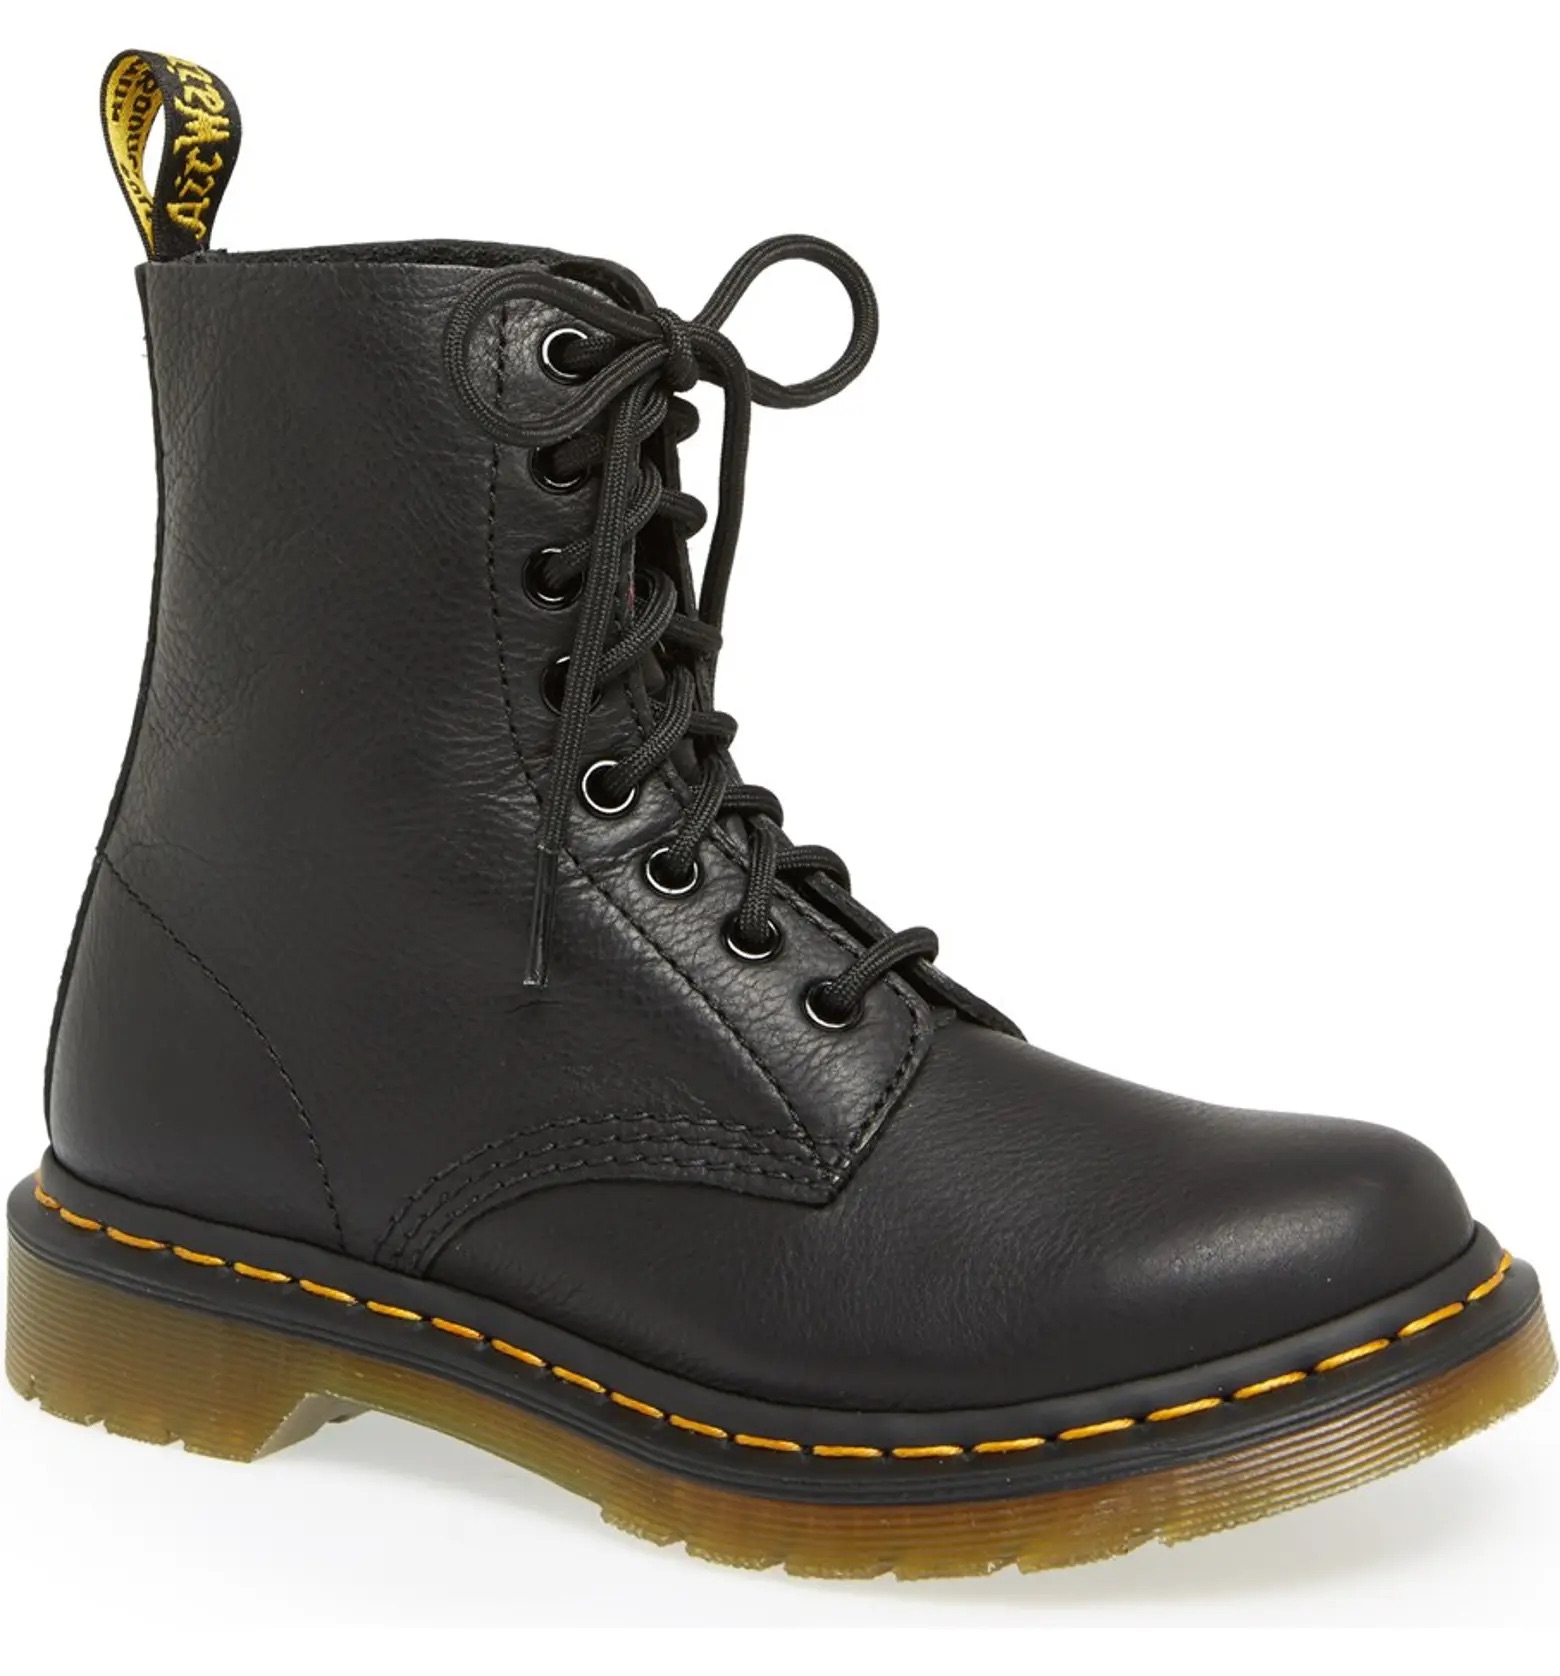 We Ranked The Top 5 Best Dr. Martens Boots To Shop Now | Who What Wear